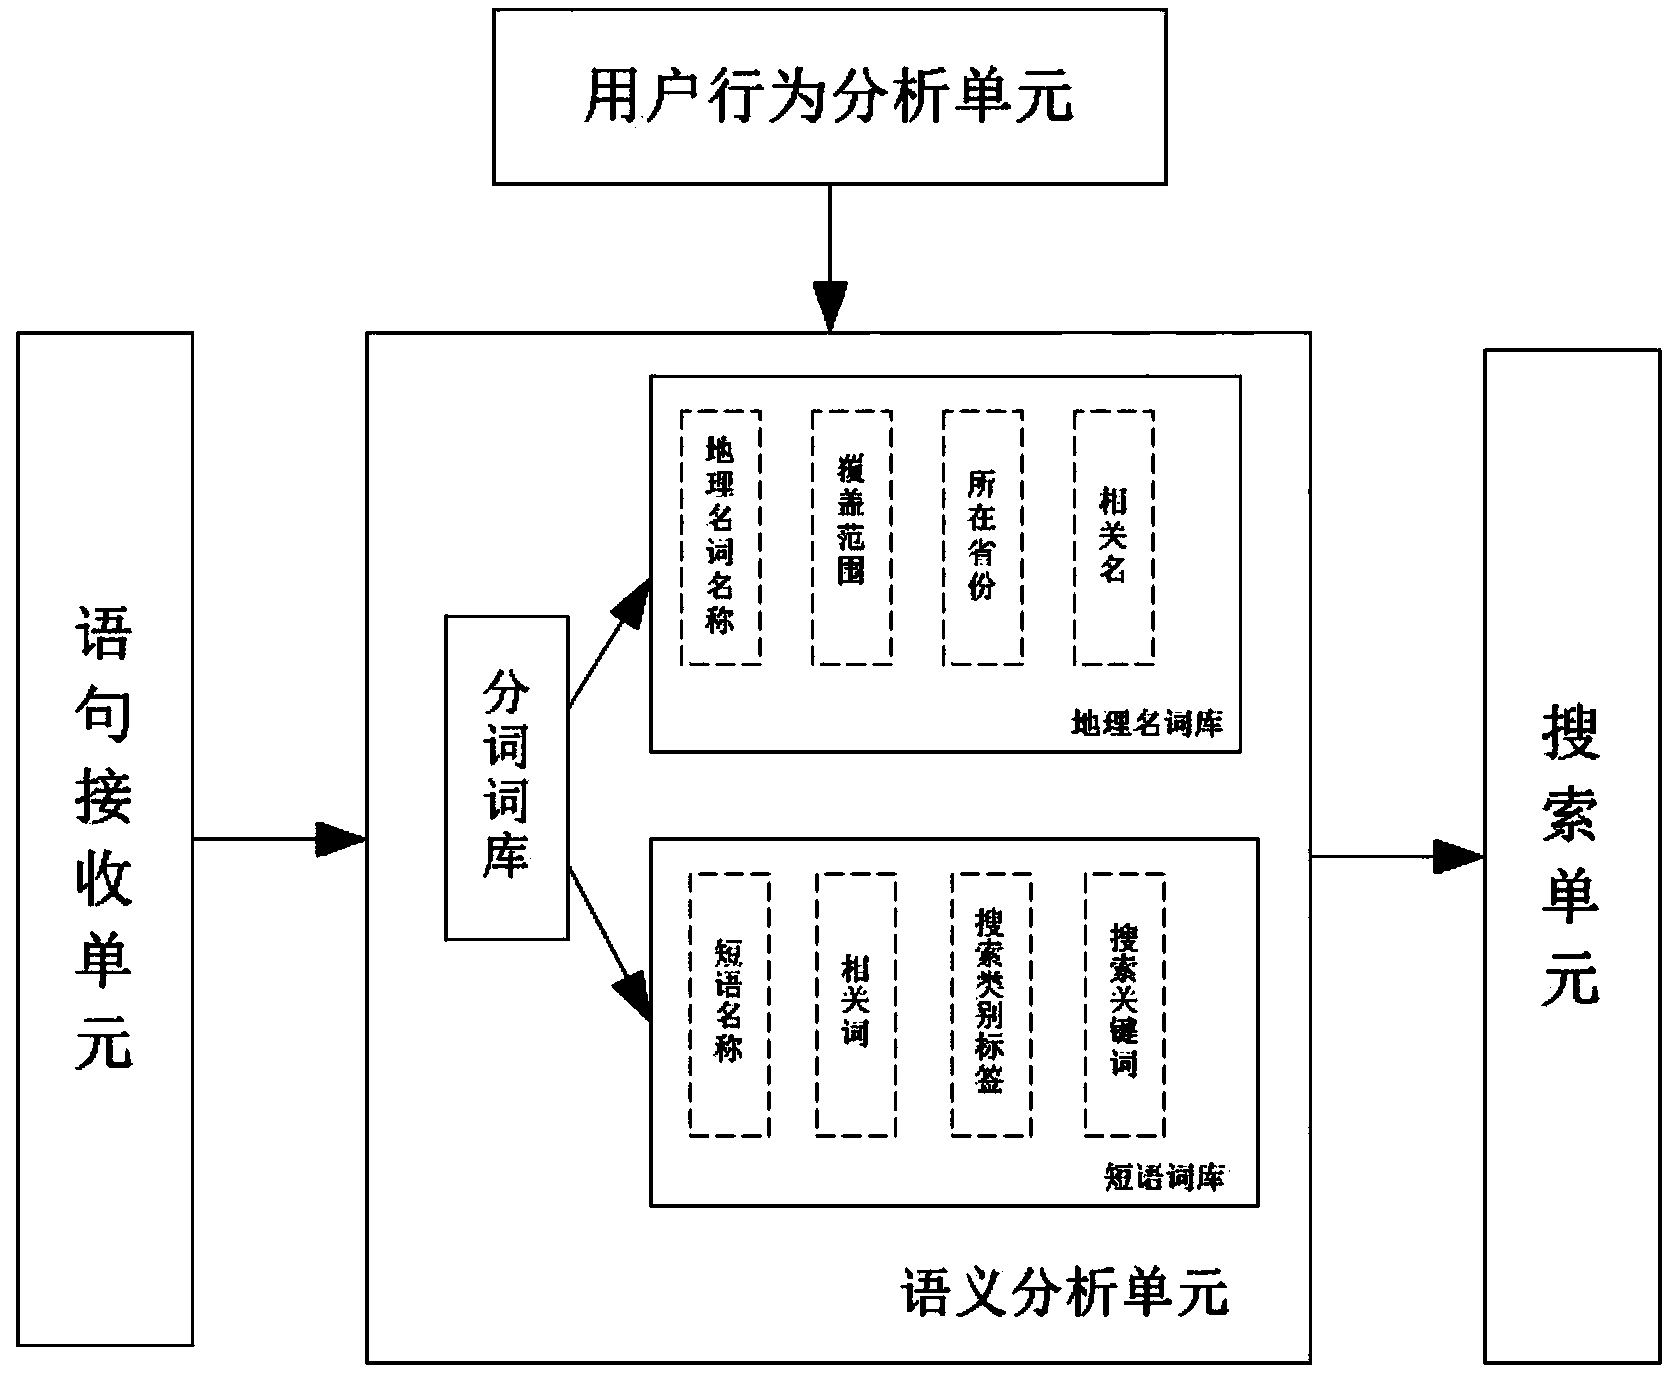 Data searching method and system based on semantic analysis